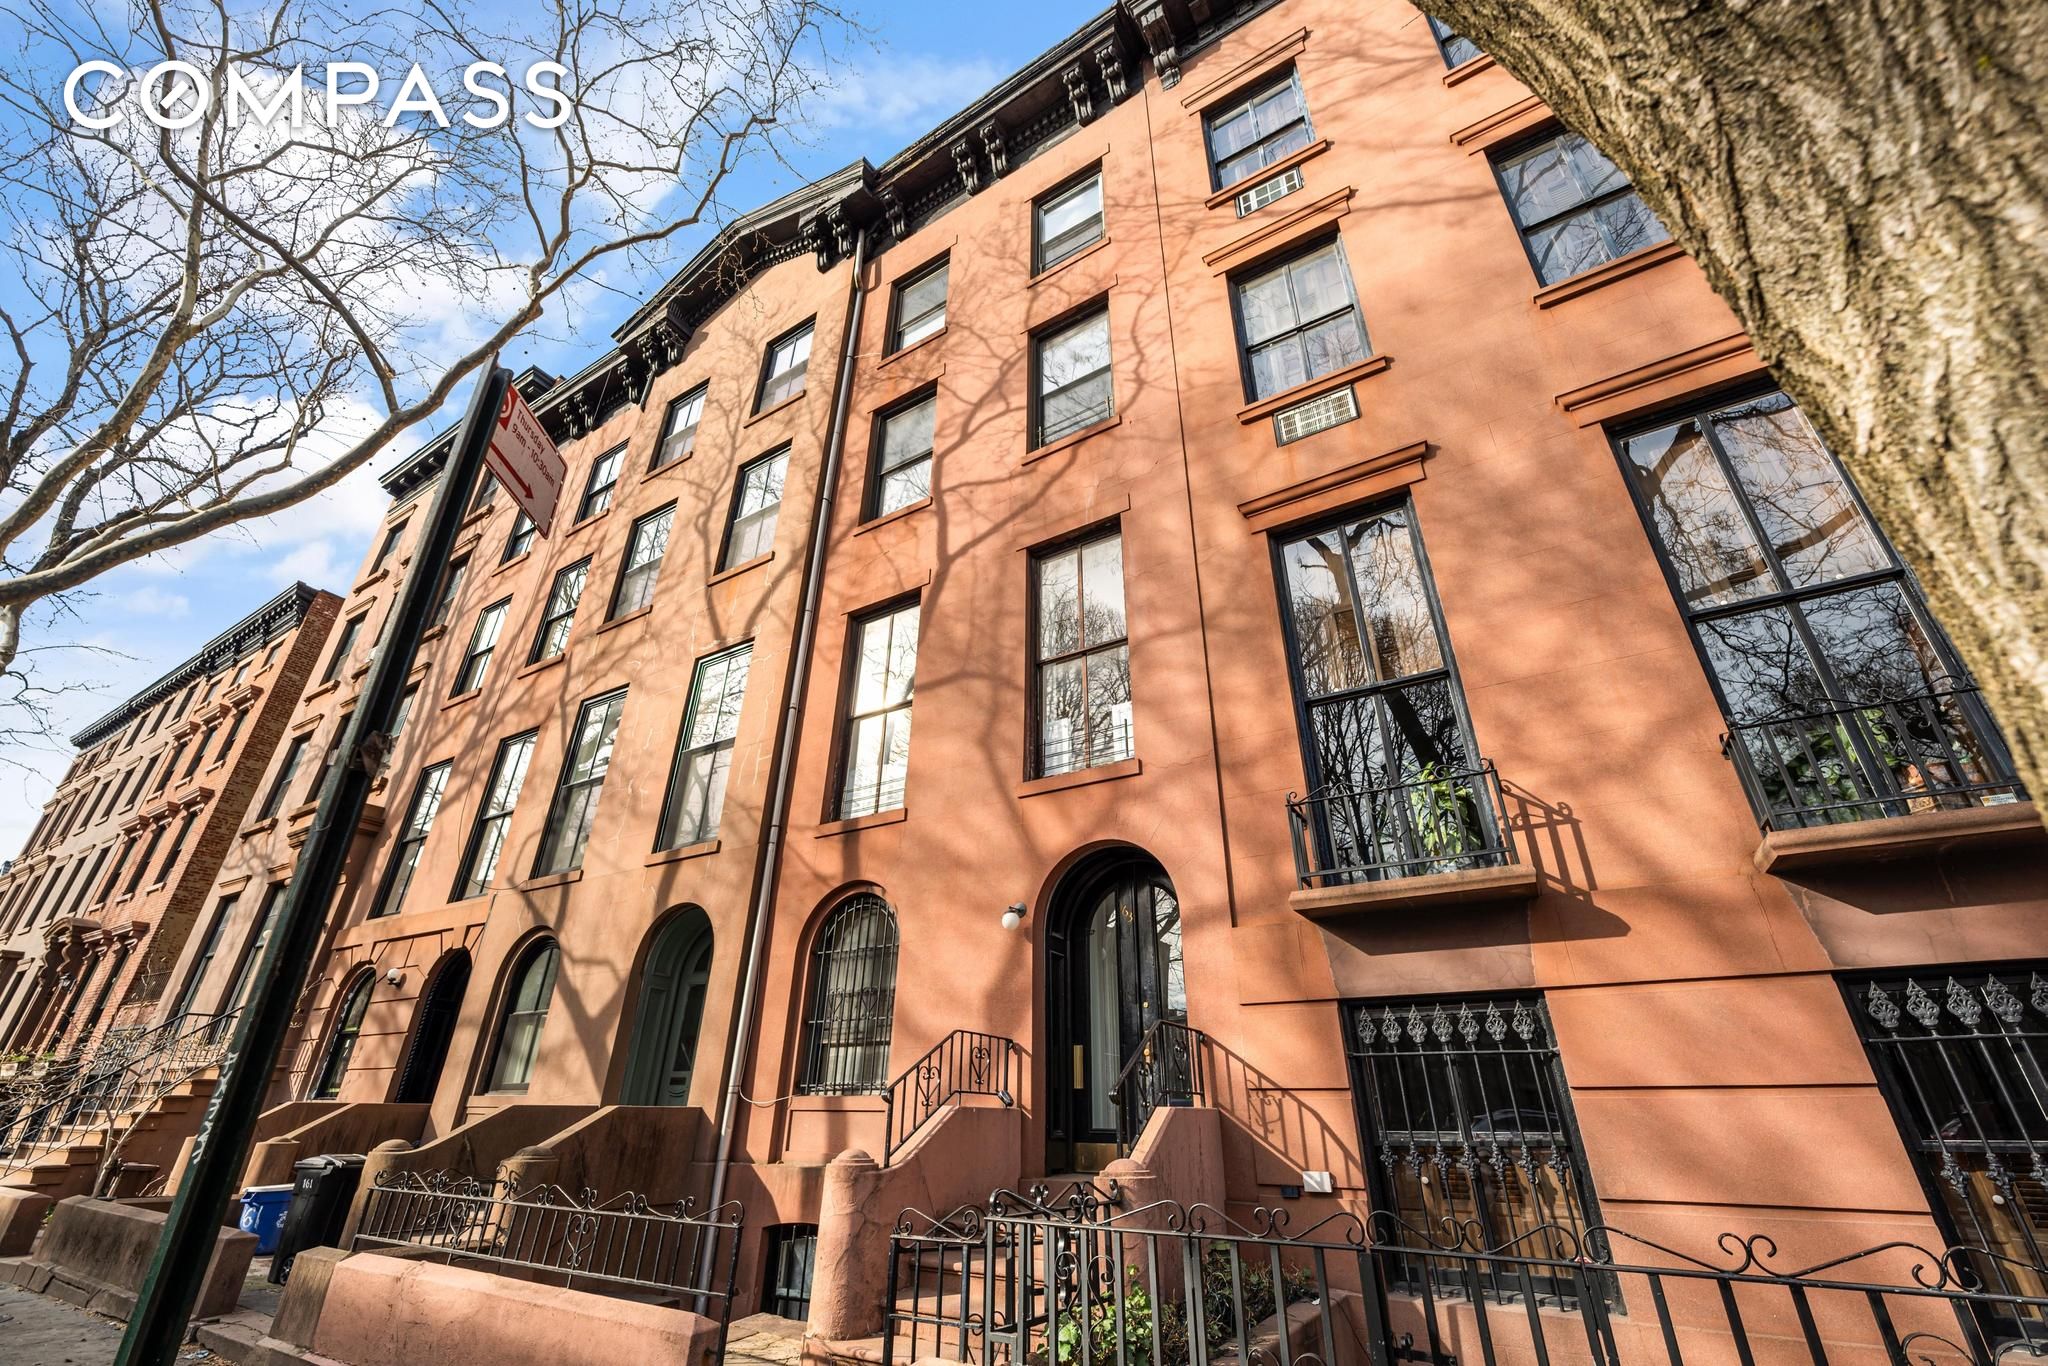 163 Congress Street Townhoiuse, Cobble Hill, Brooklyn, New York - 5 Bedrooms  
3.5 Bathrooms  
16 Rooms - 